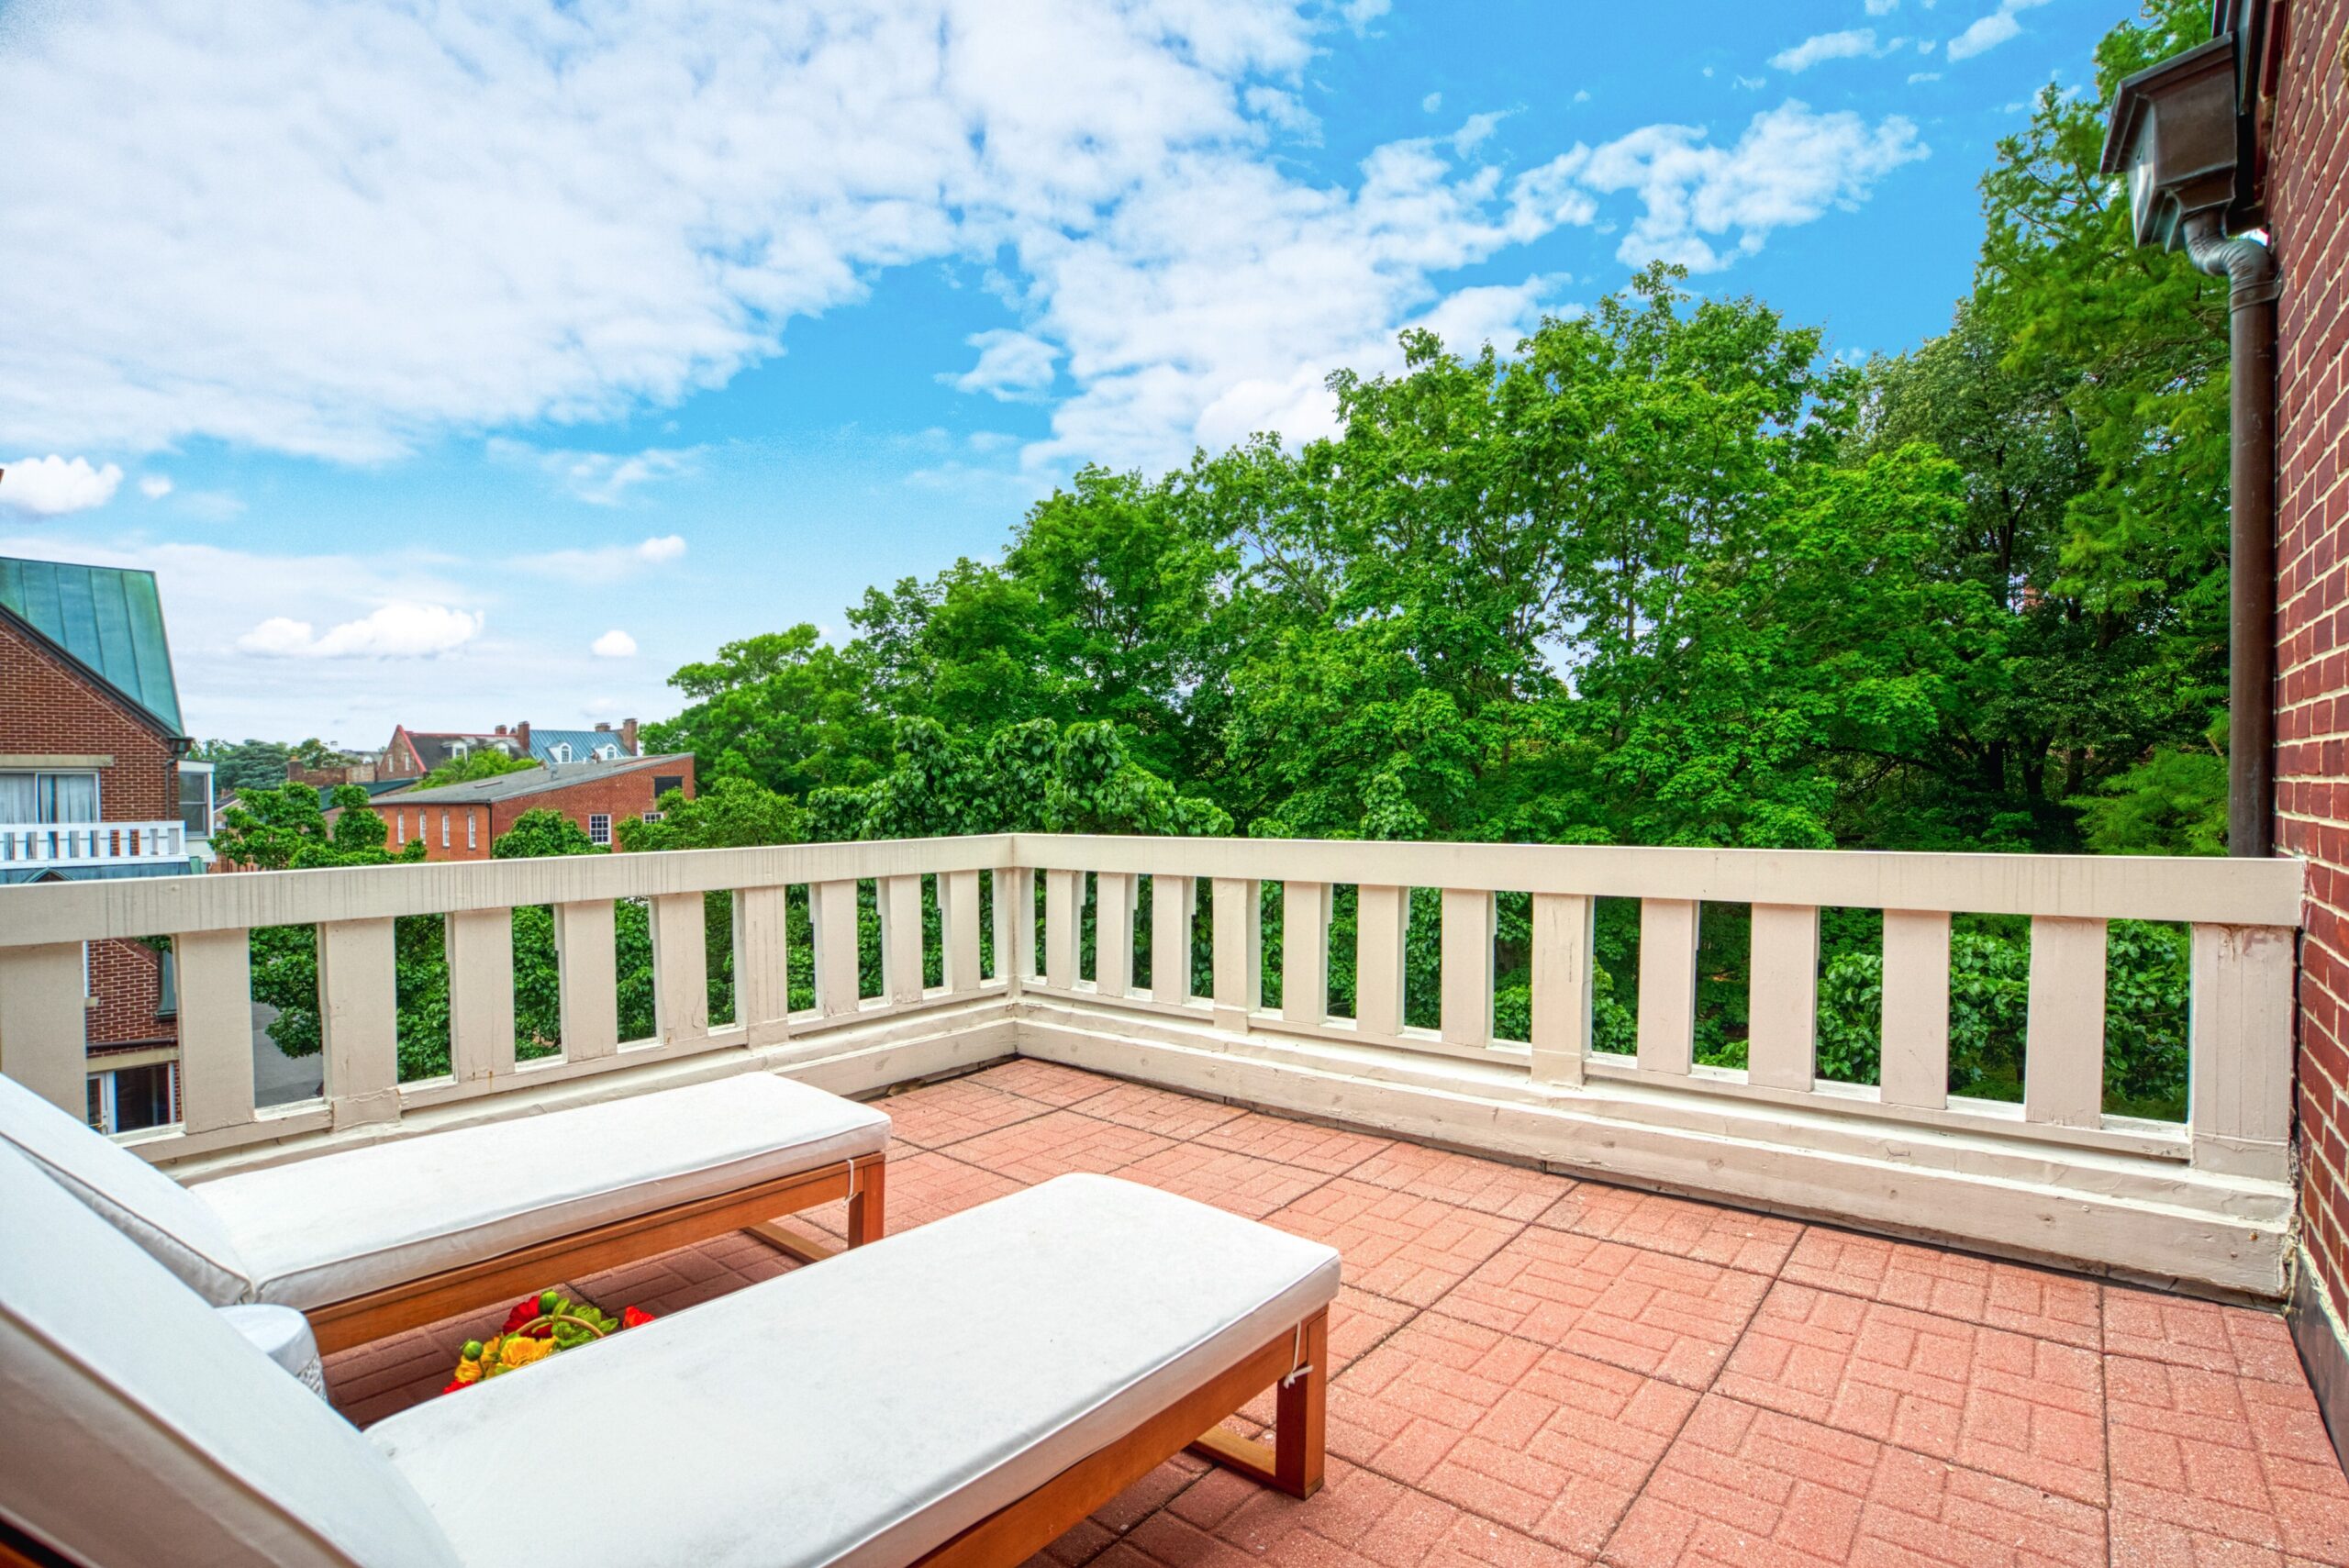 Professional exterior photo of 125 N Lee St, Alexandria, VA - showing the balcony of unit #401 with brick patio and 2 wood and cream lounge chairs